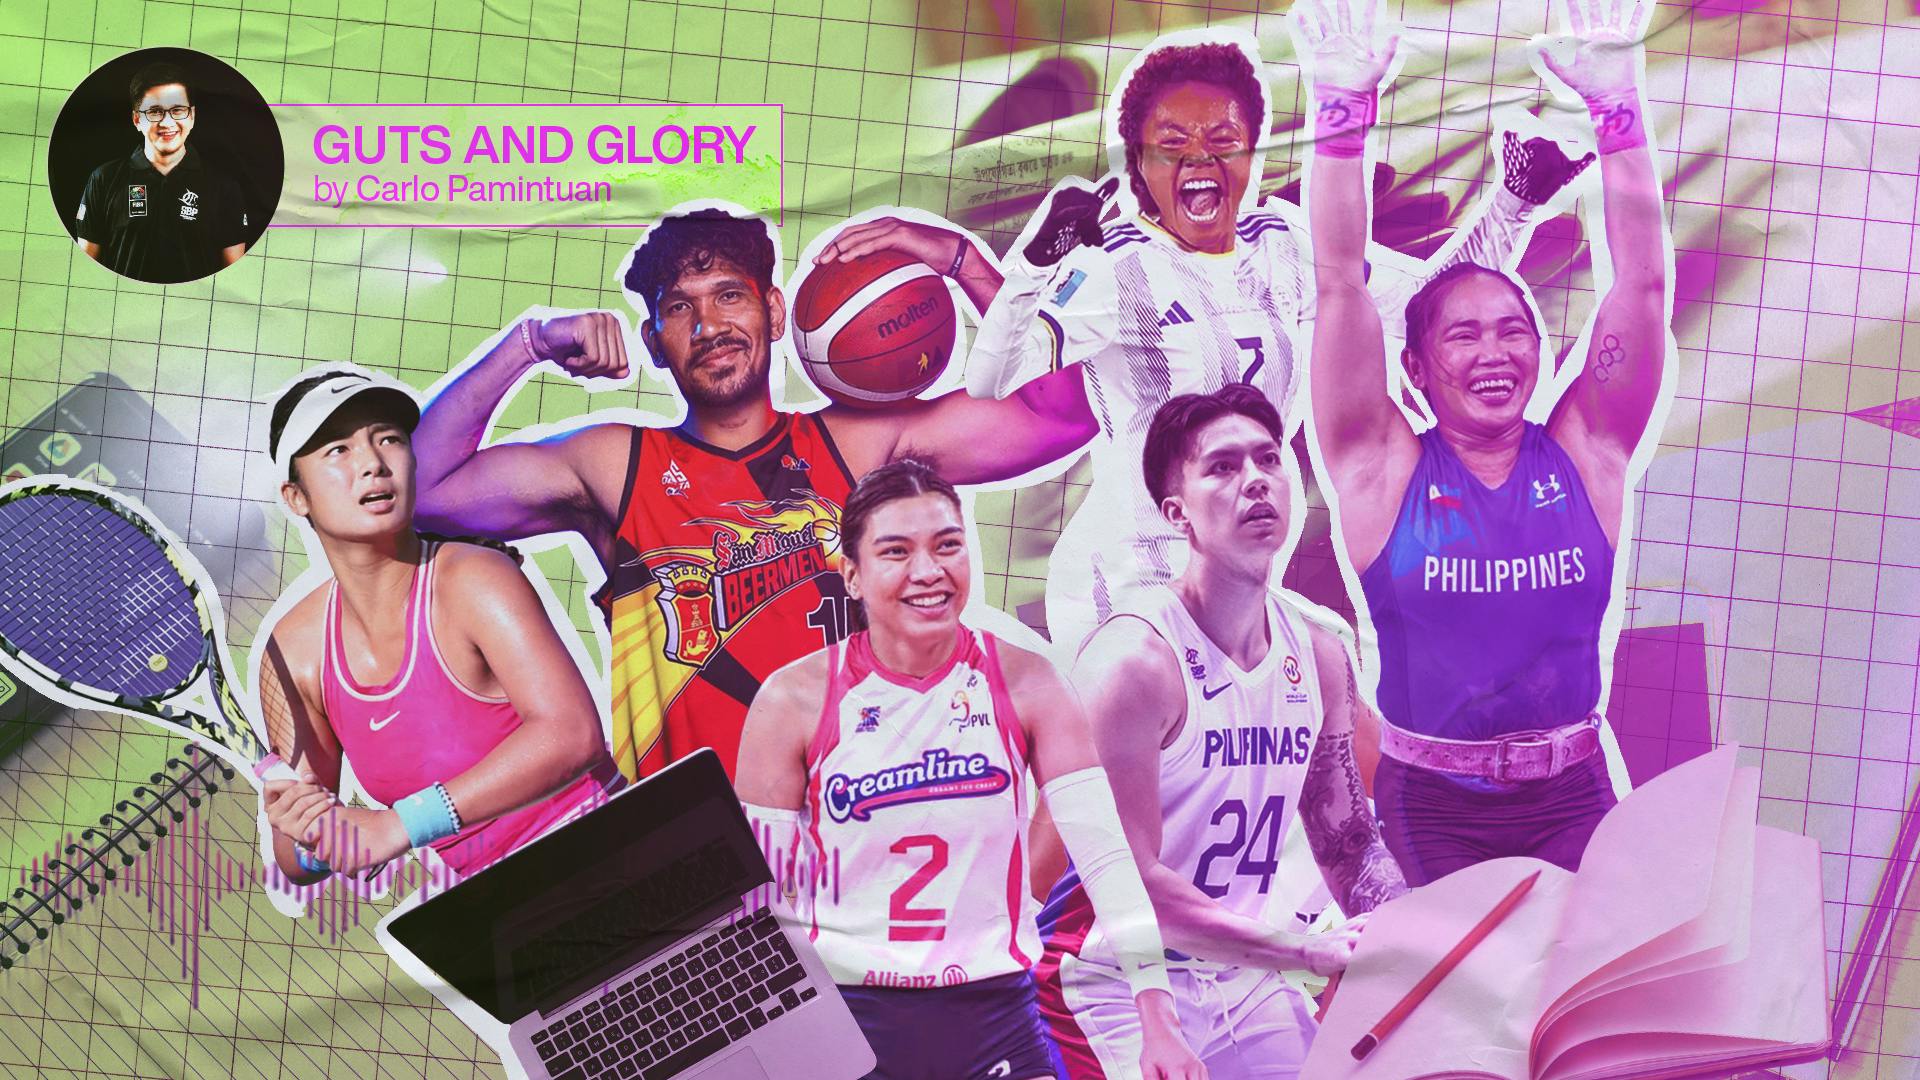 GUTS AND GLORY | All on the same team: Why sports journalism still matters despite tough hit in recent years